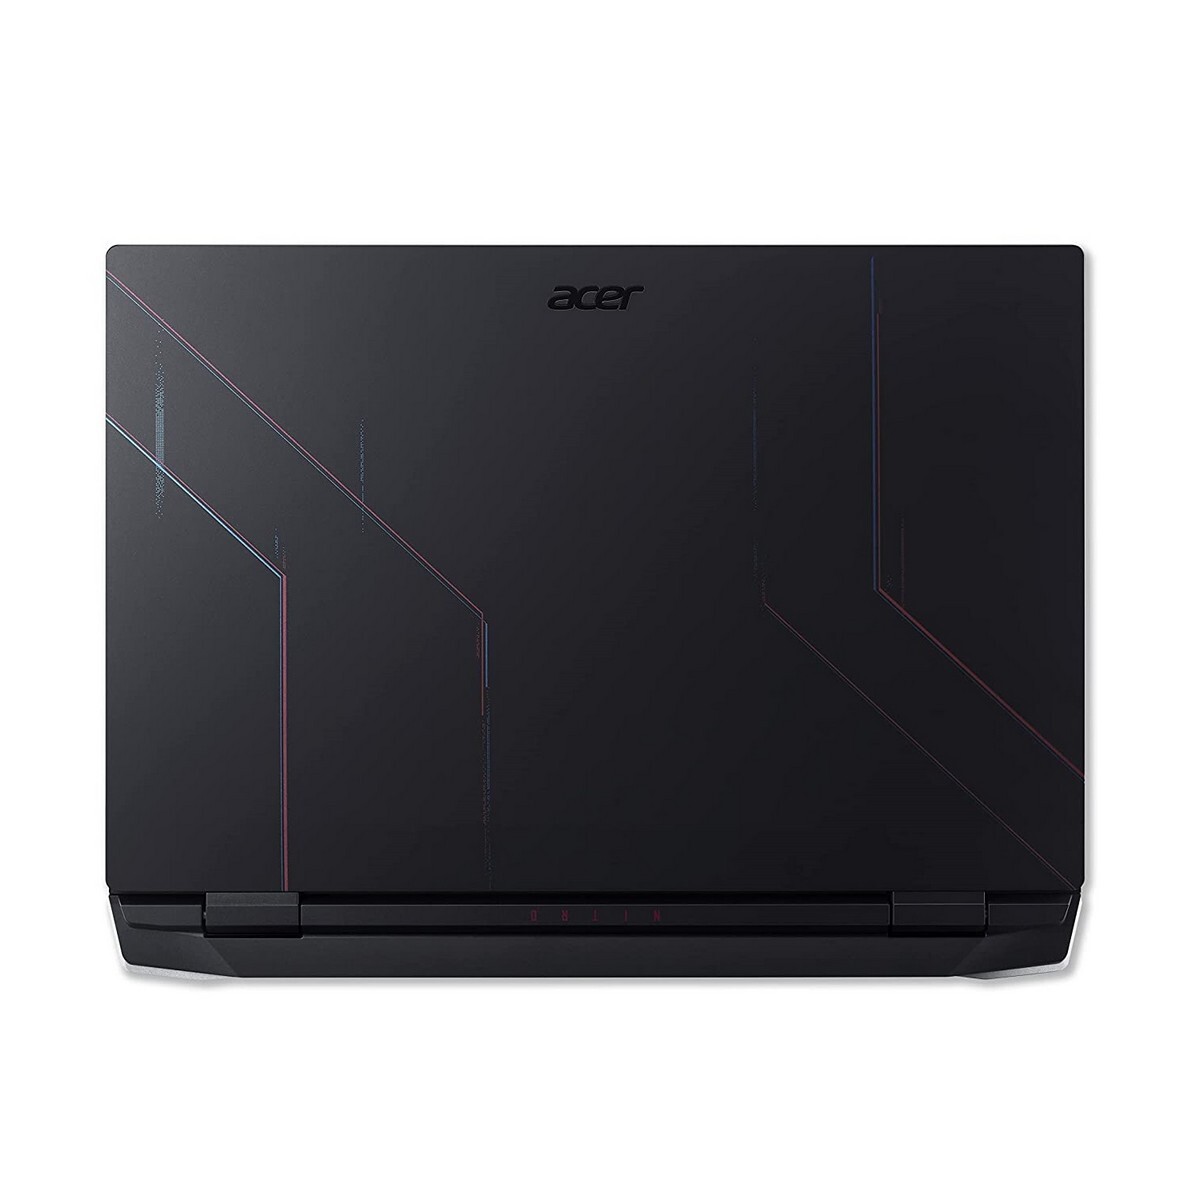 Acer Nitro 5 Core i5 12th Gen 8 GB/512 GB SSD/4 GB Graphics/Win11 Home AN515-58 Gaming Laptop